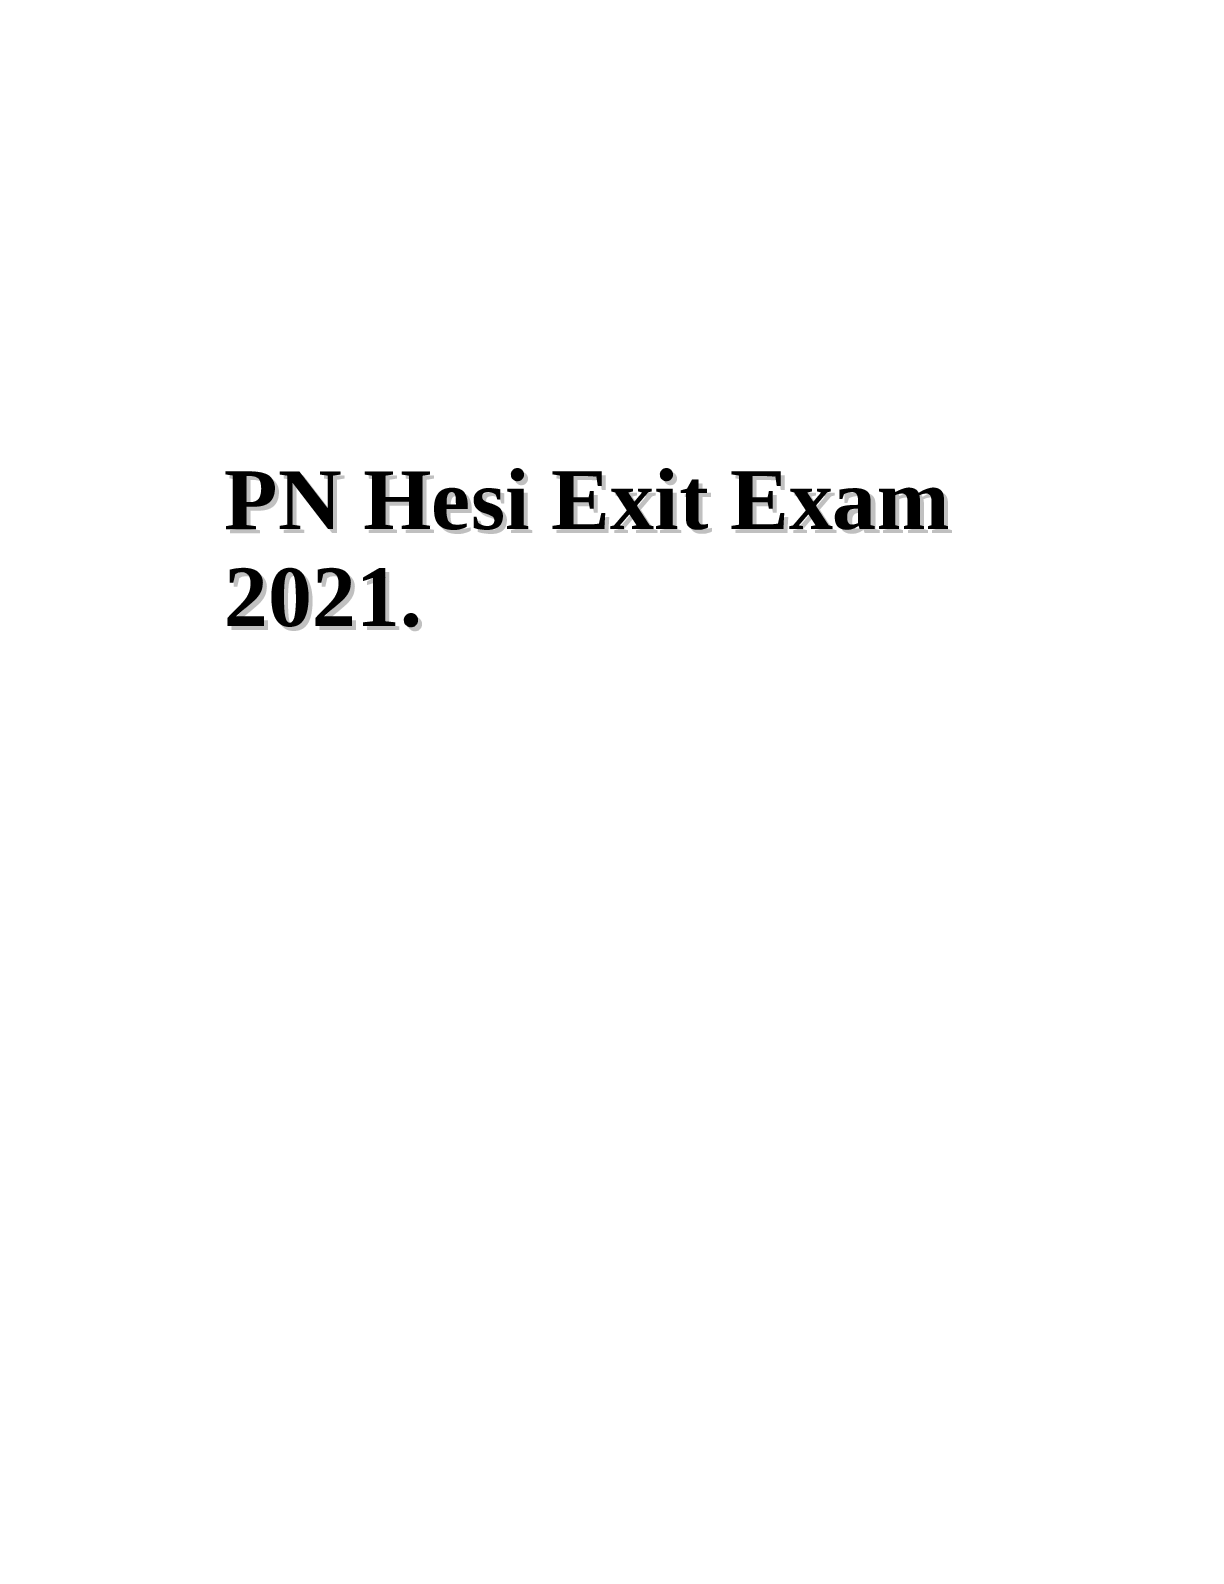 PN Hesi Exit Exam 2021 With Correct Answers